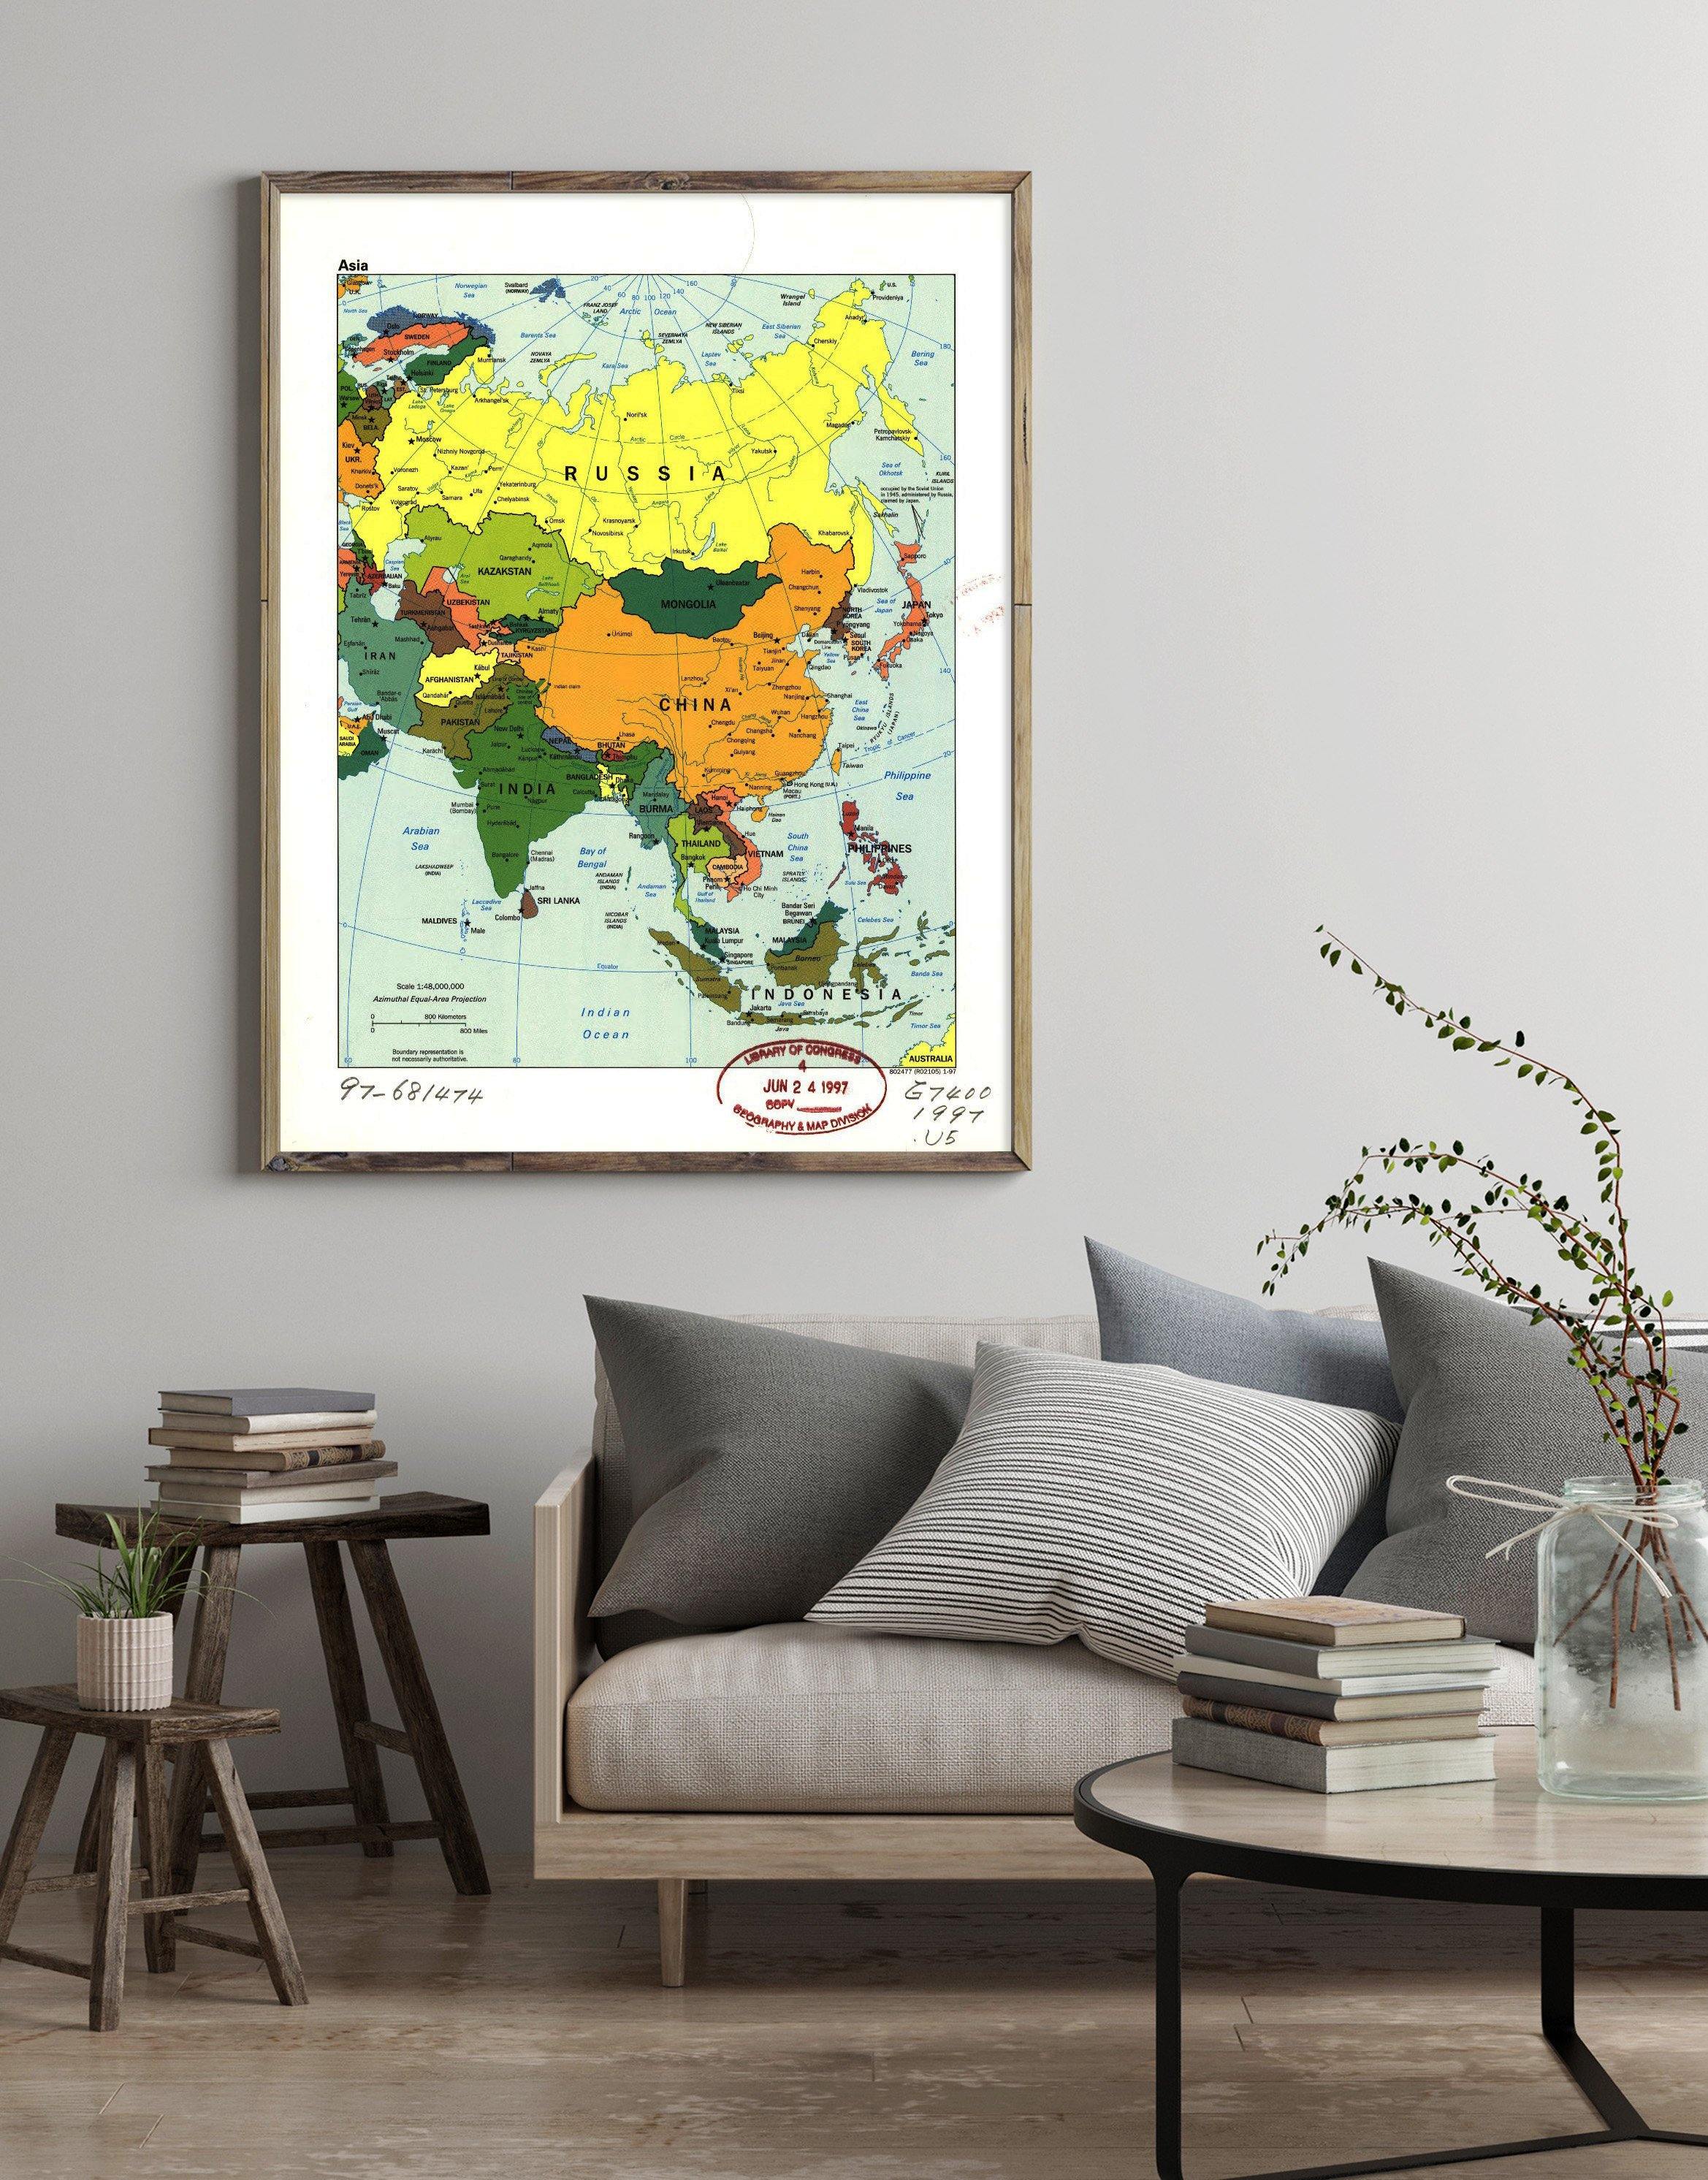 1997 Map| Asia| Asia Map Size: 18 inches x 24 inches |Fits 18x24 size - New York Map Company